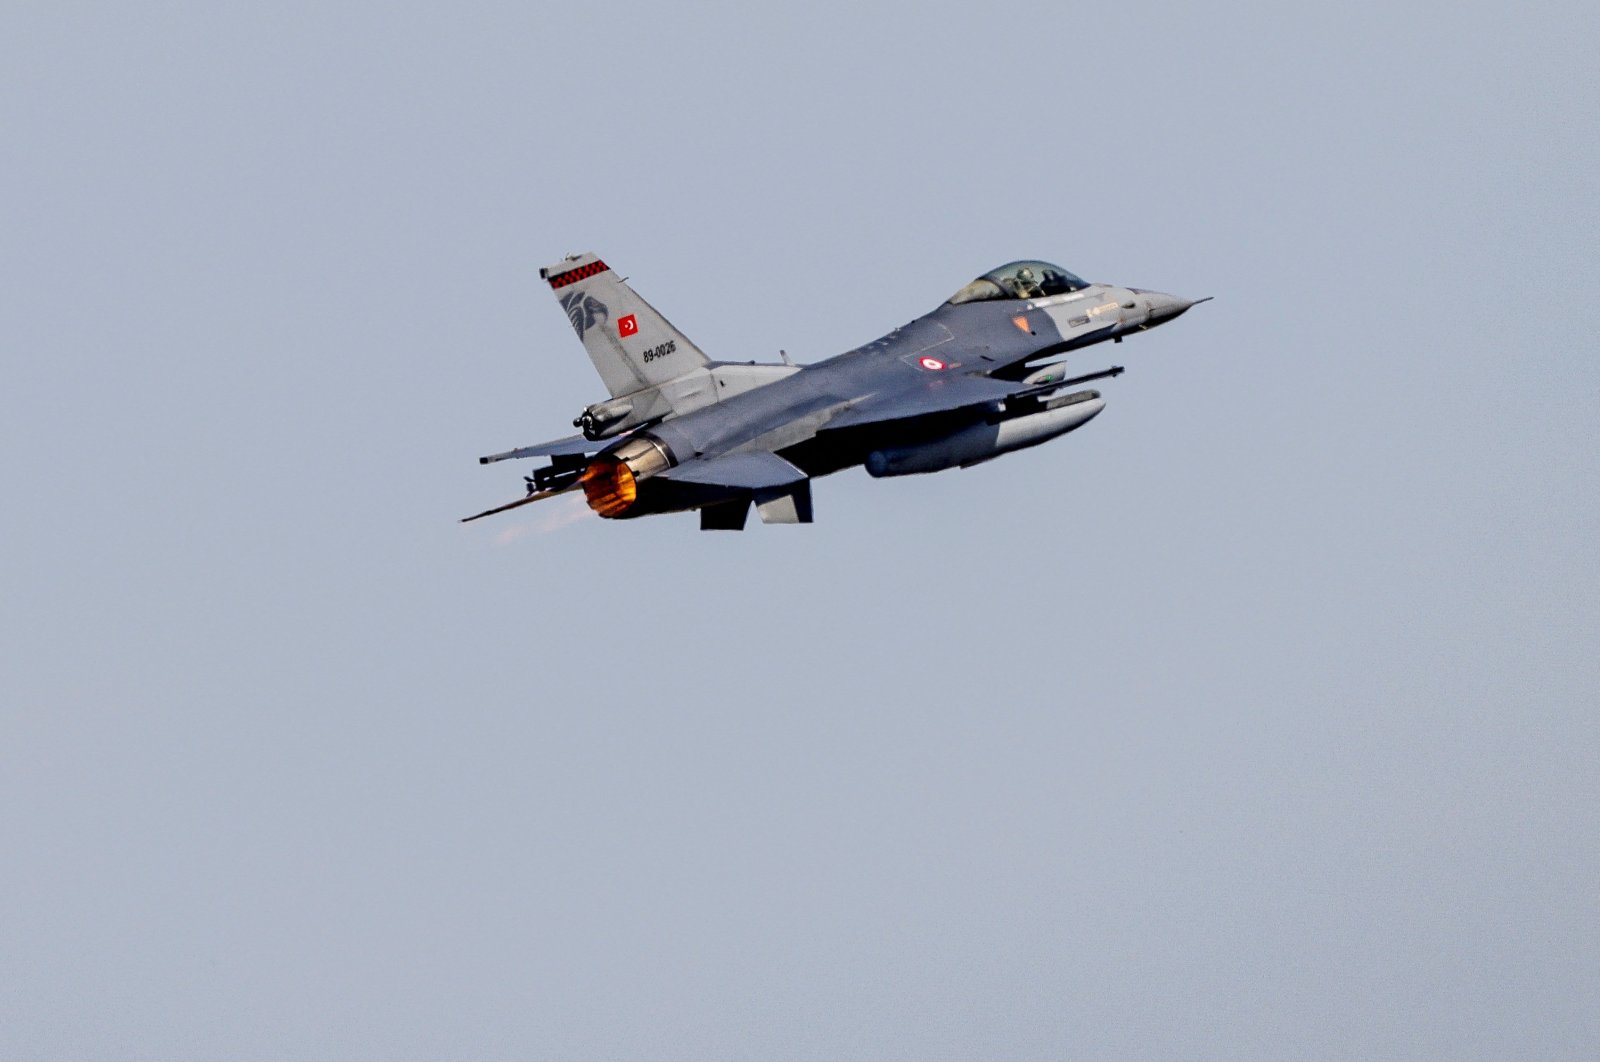 An F-16 combat jet of the Turkish Air Forces Command takes off at the Air Defender Exercise 2023 at the military airport of Jagel, northern Germany, June 9, 2023. (Reuters Photo)